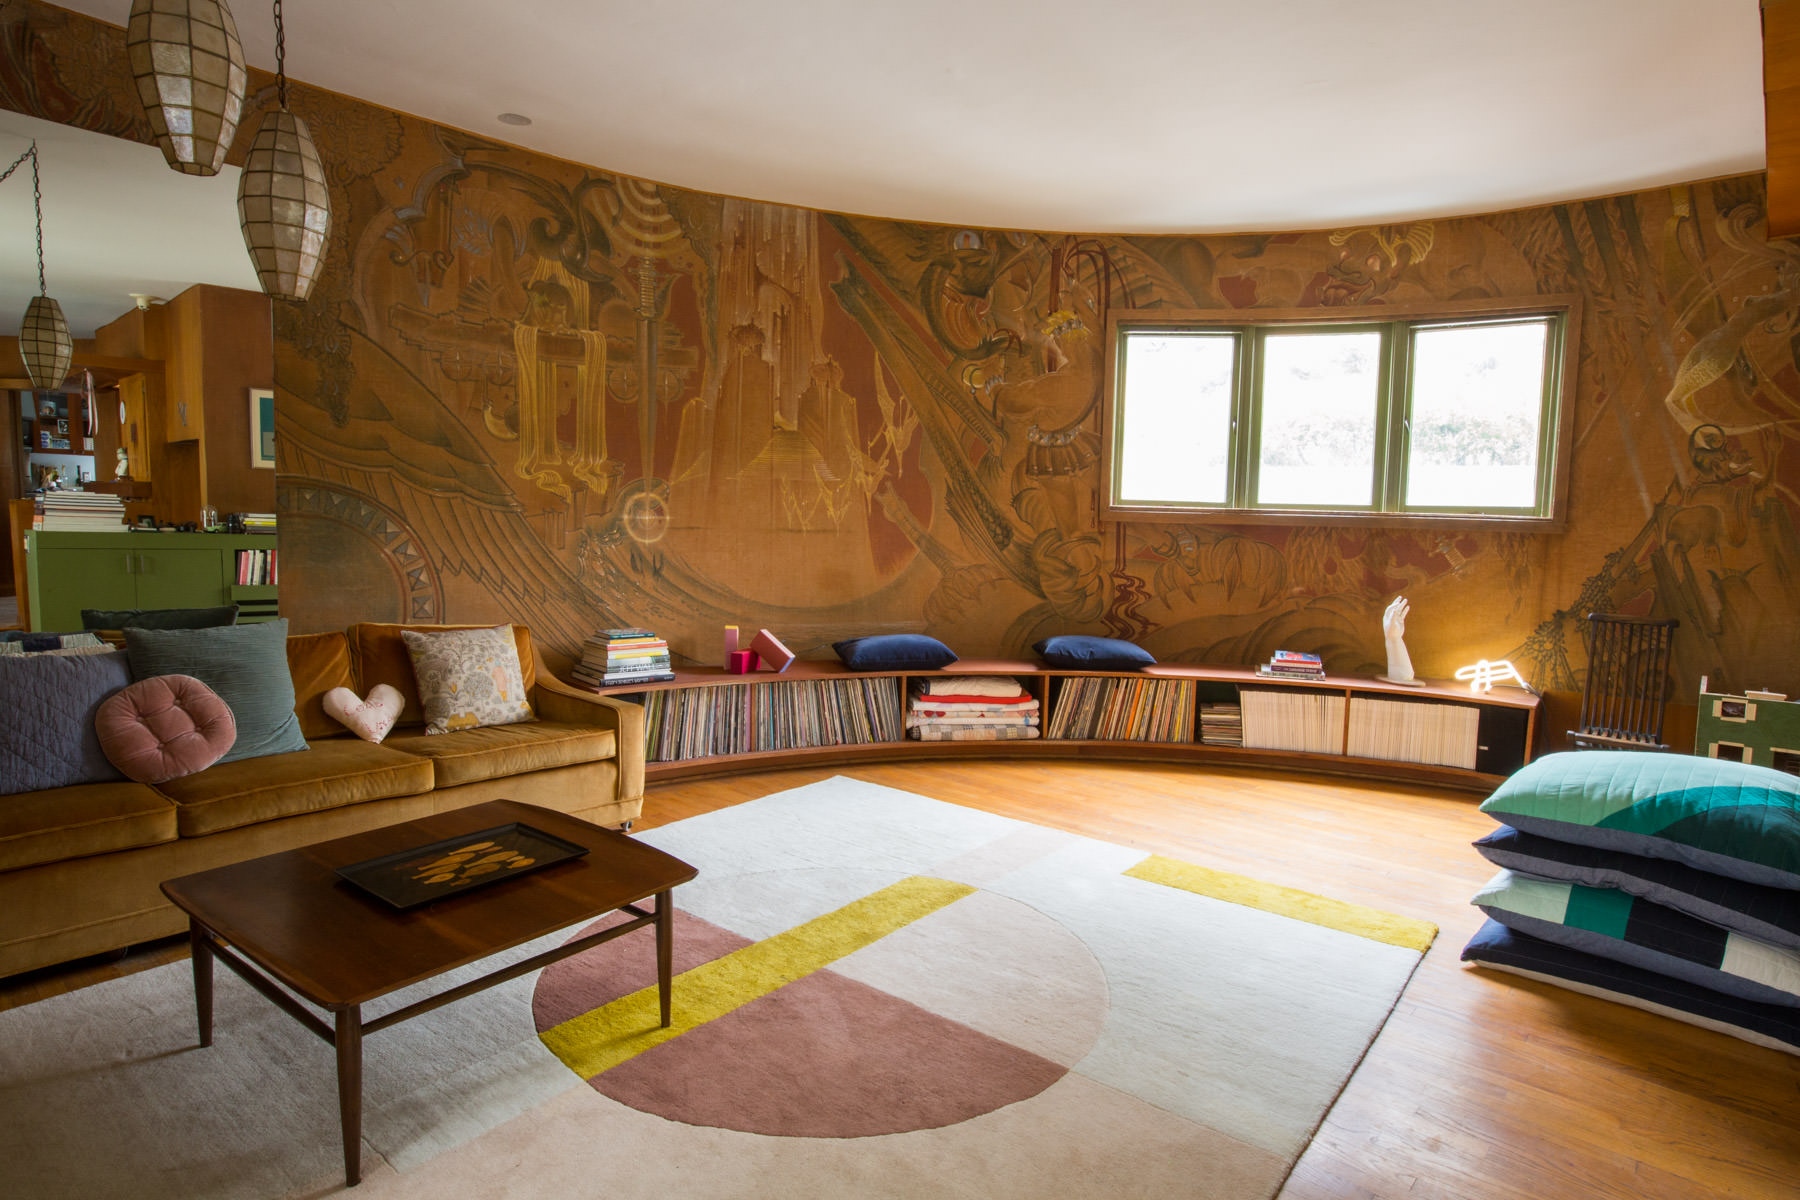 Our Space Inspires Us | Guardian - A 1941 mural painted by production designer John DeCuir,...